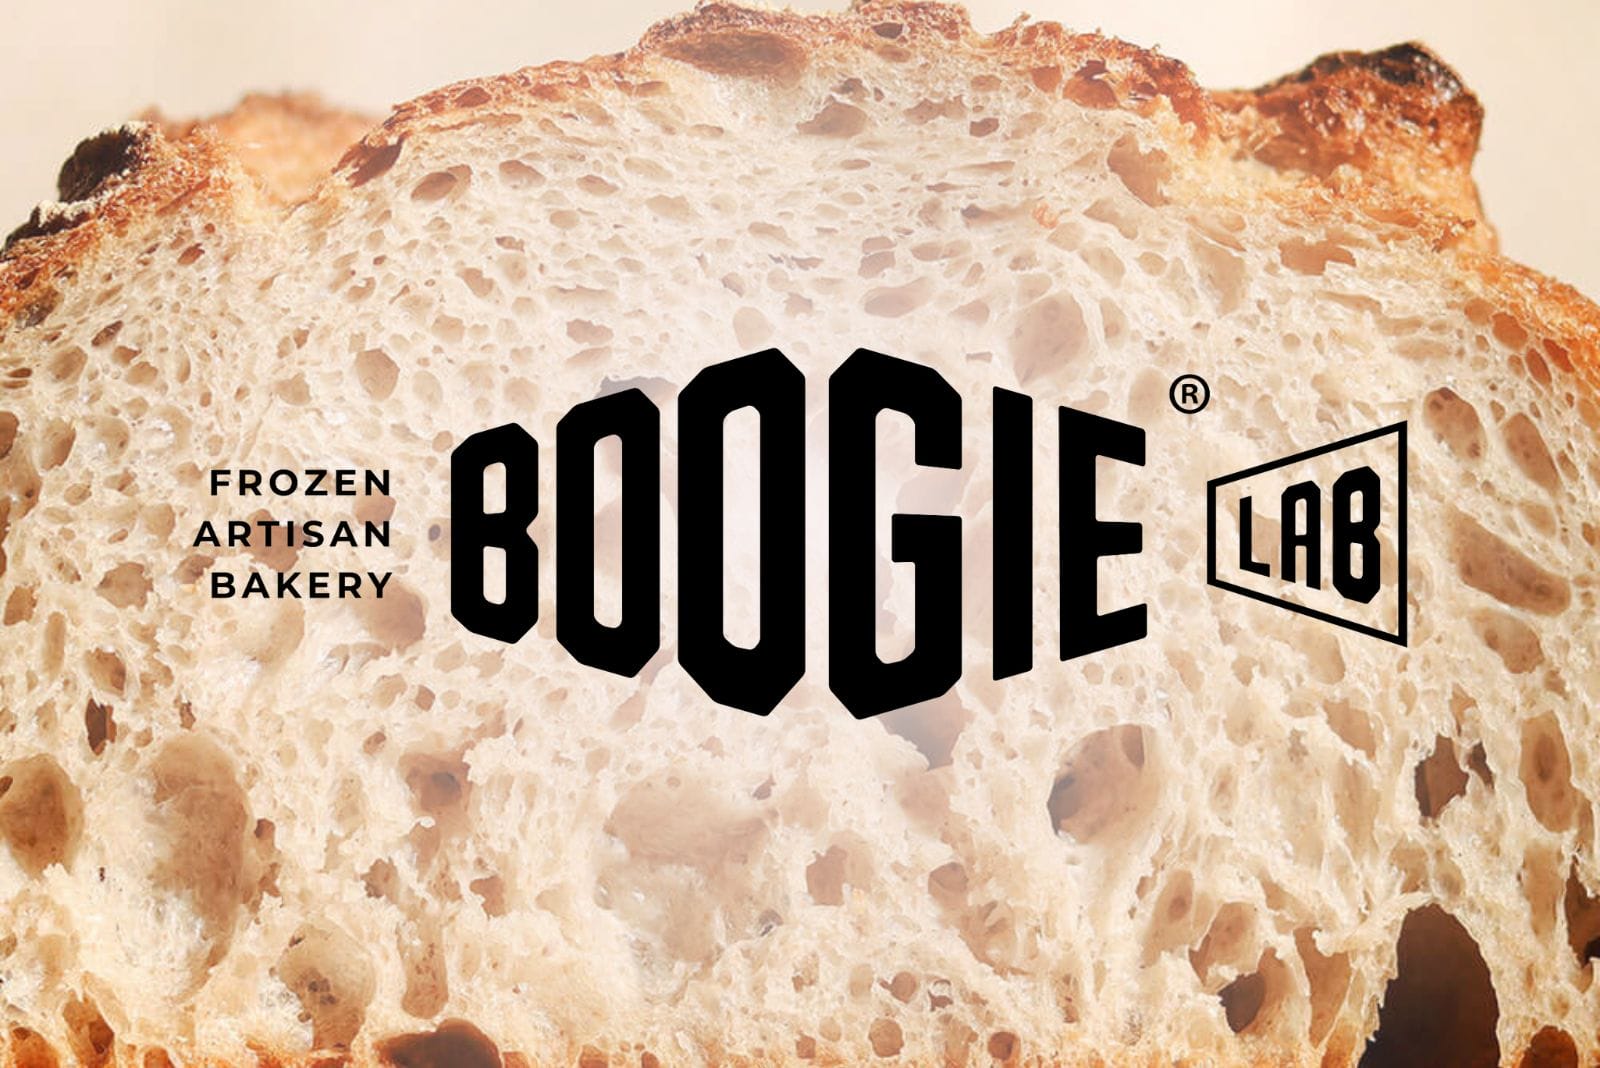 slice of bread with boogie lab logo